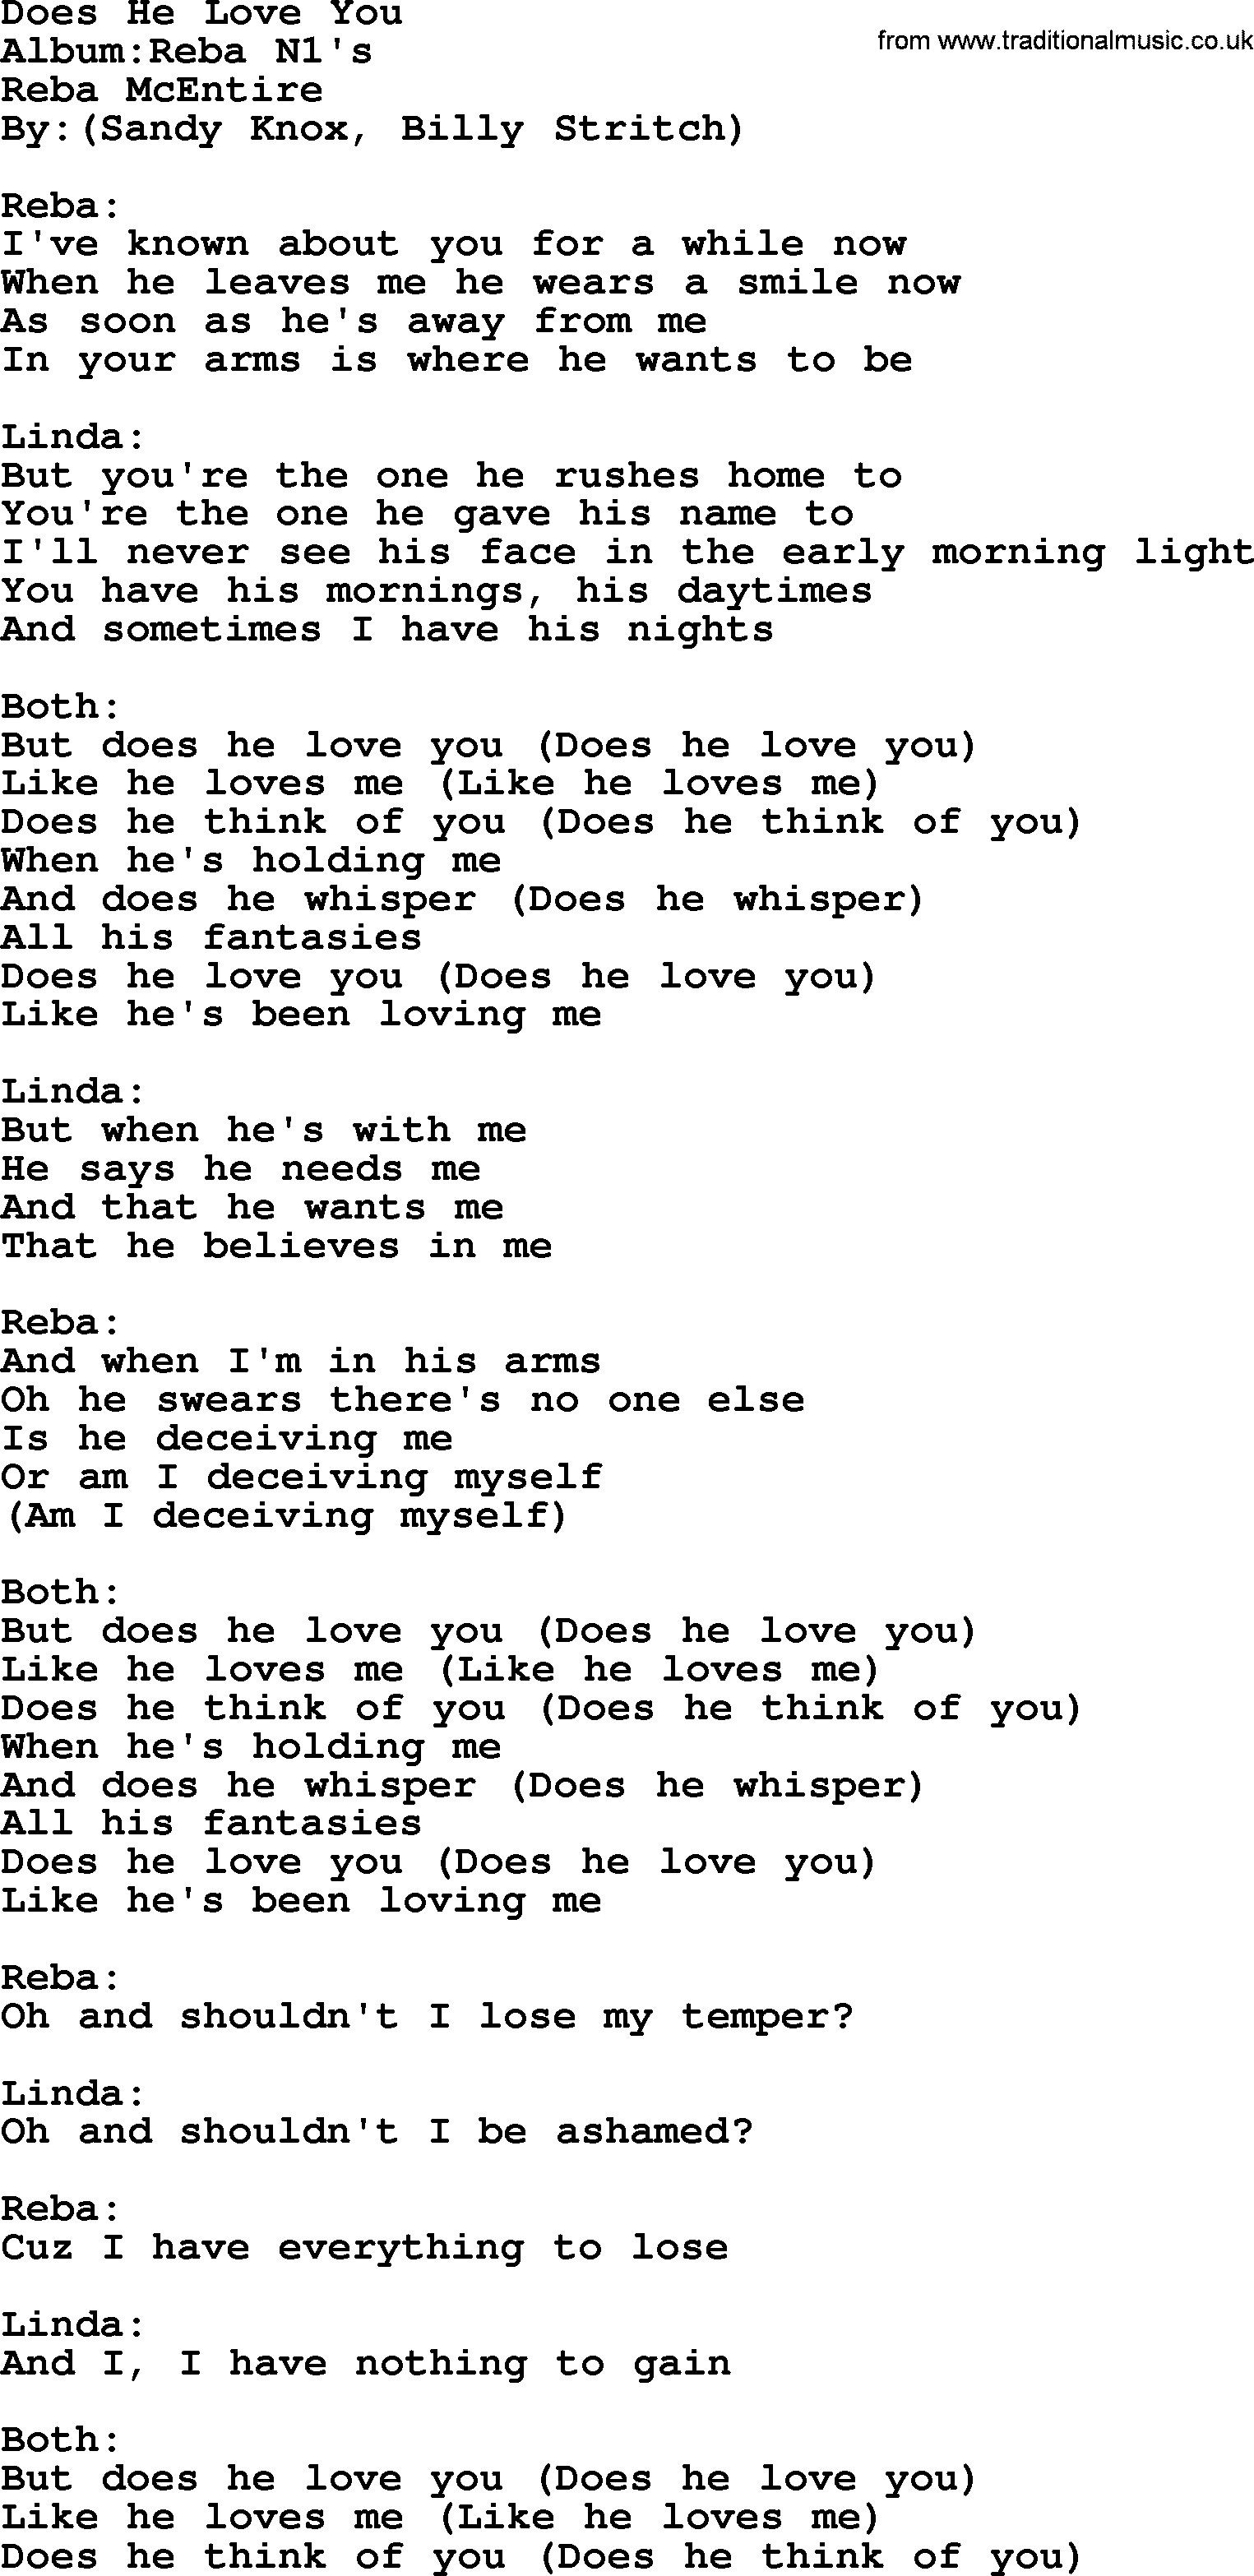 Reba McEntire song: Does He Love You lyrics